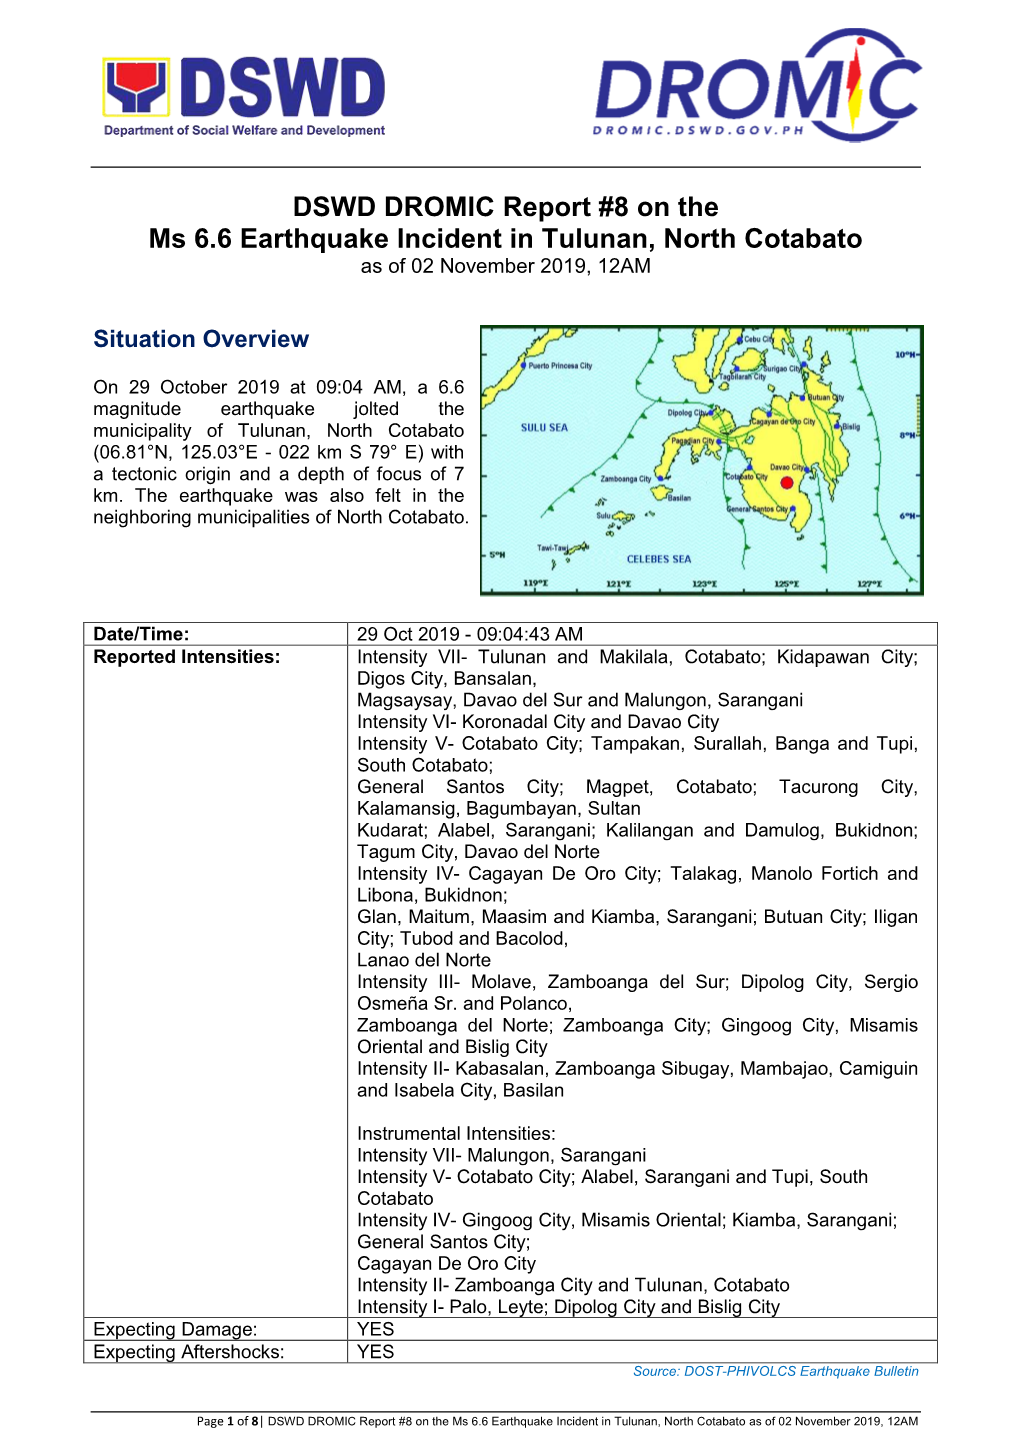 DSWD DROMIC Report #8 on the Ms 6.6 Earthquake Incident in Tulunan, North Cotabato As of 02 November 2019, 12AM